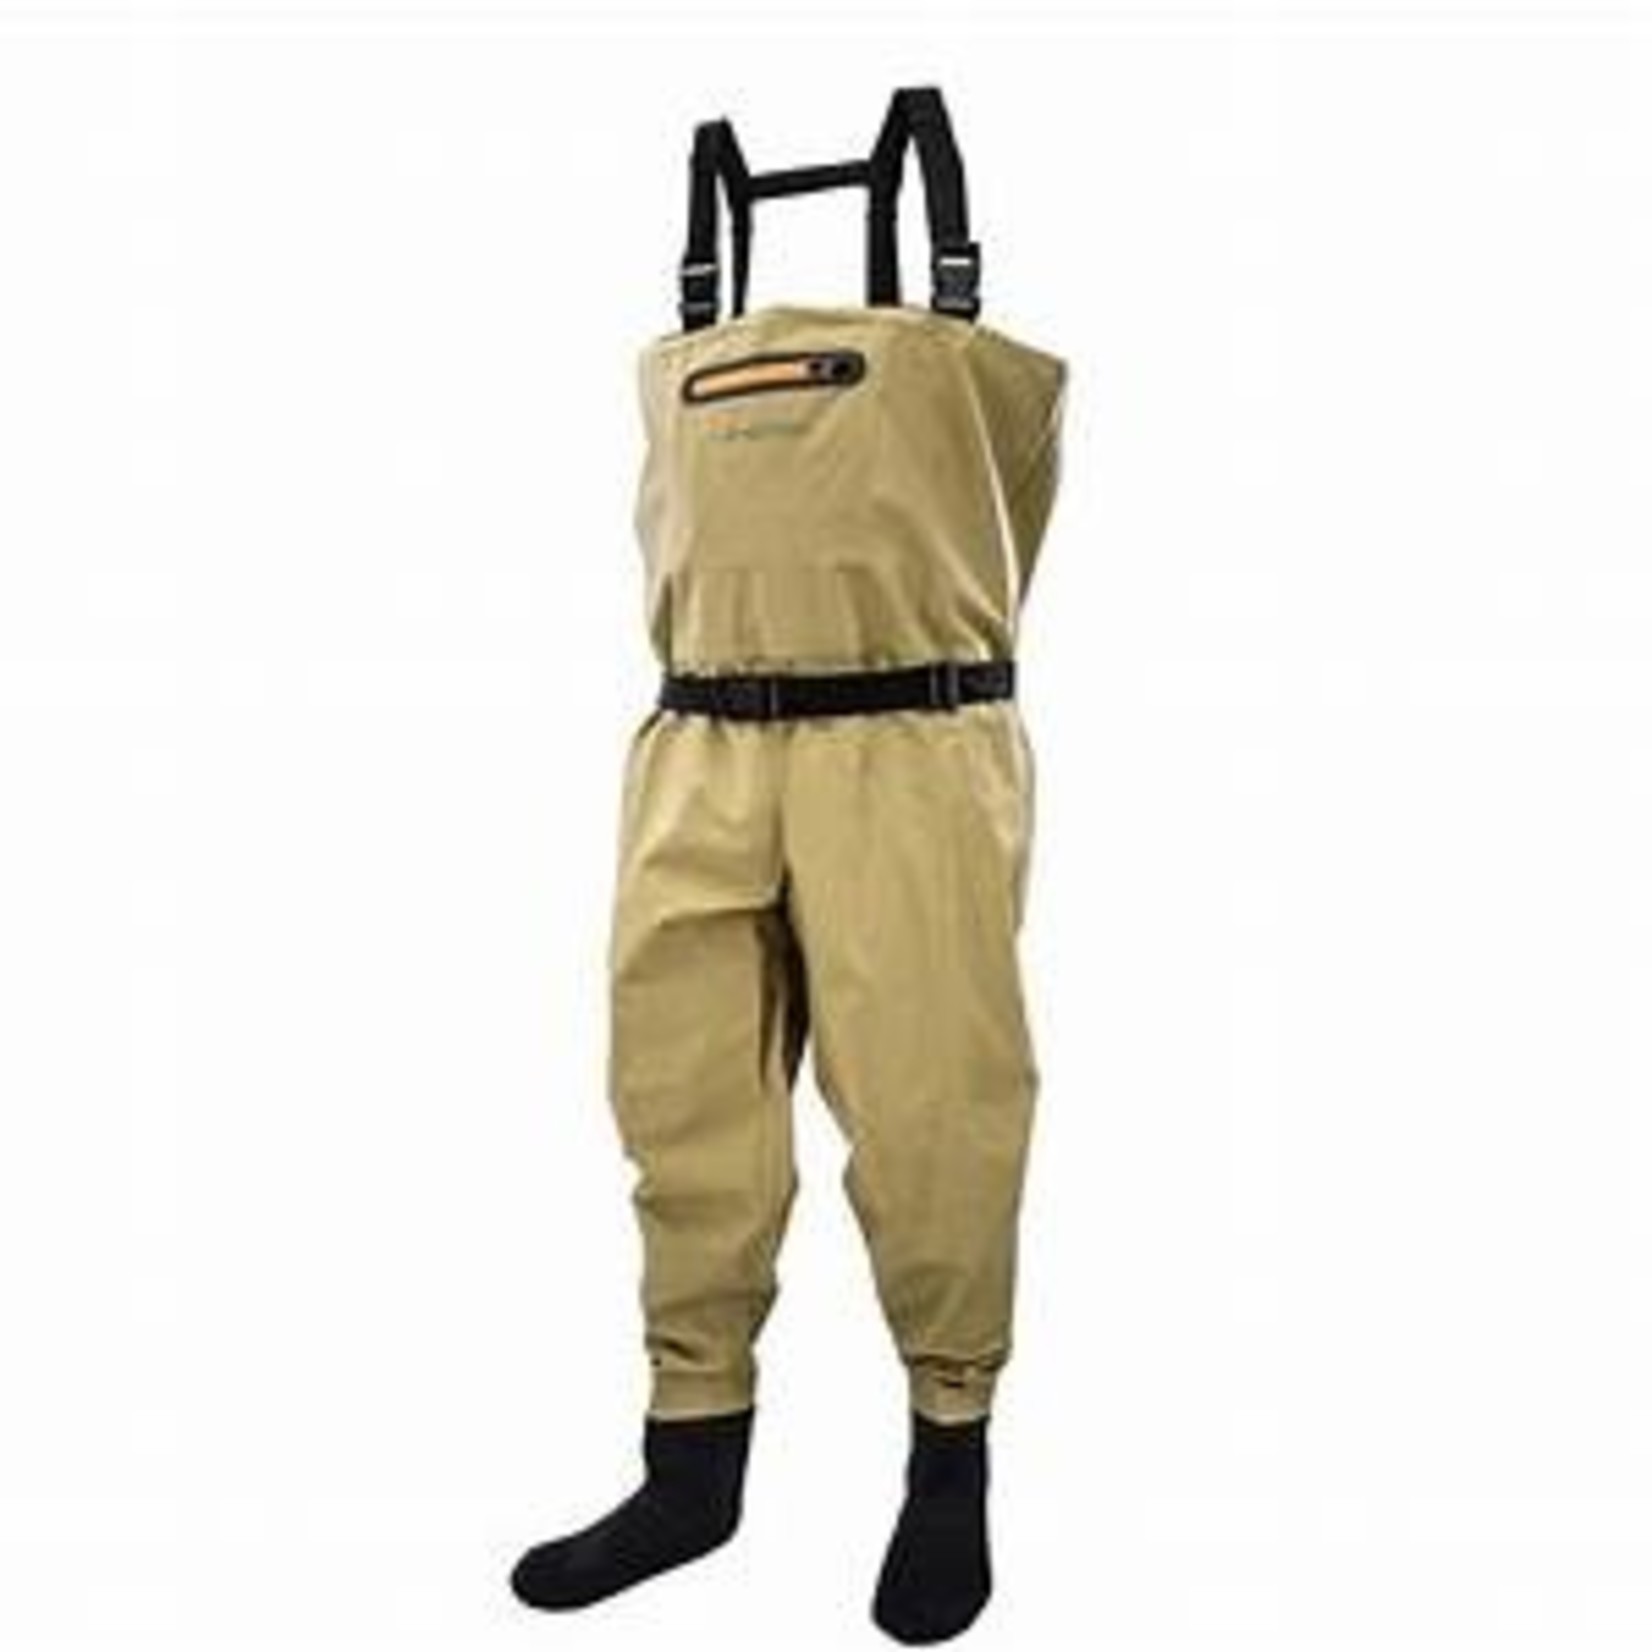 Frogg Togg Rana Breathable Chest Waders Stocking foot (discontinue)